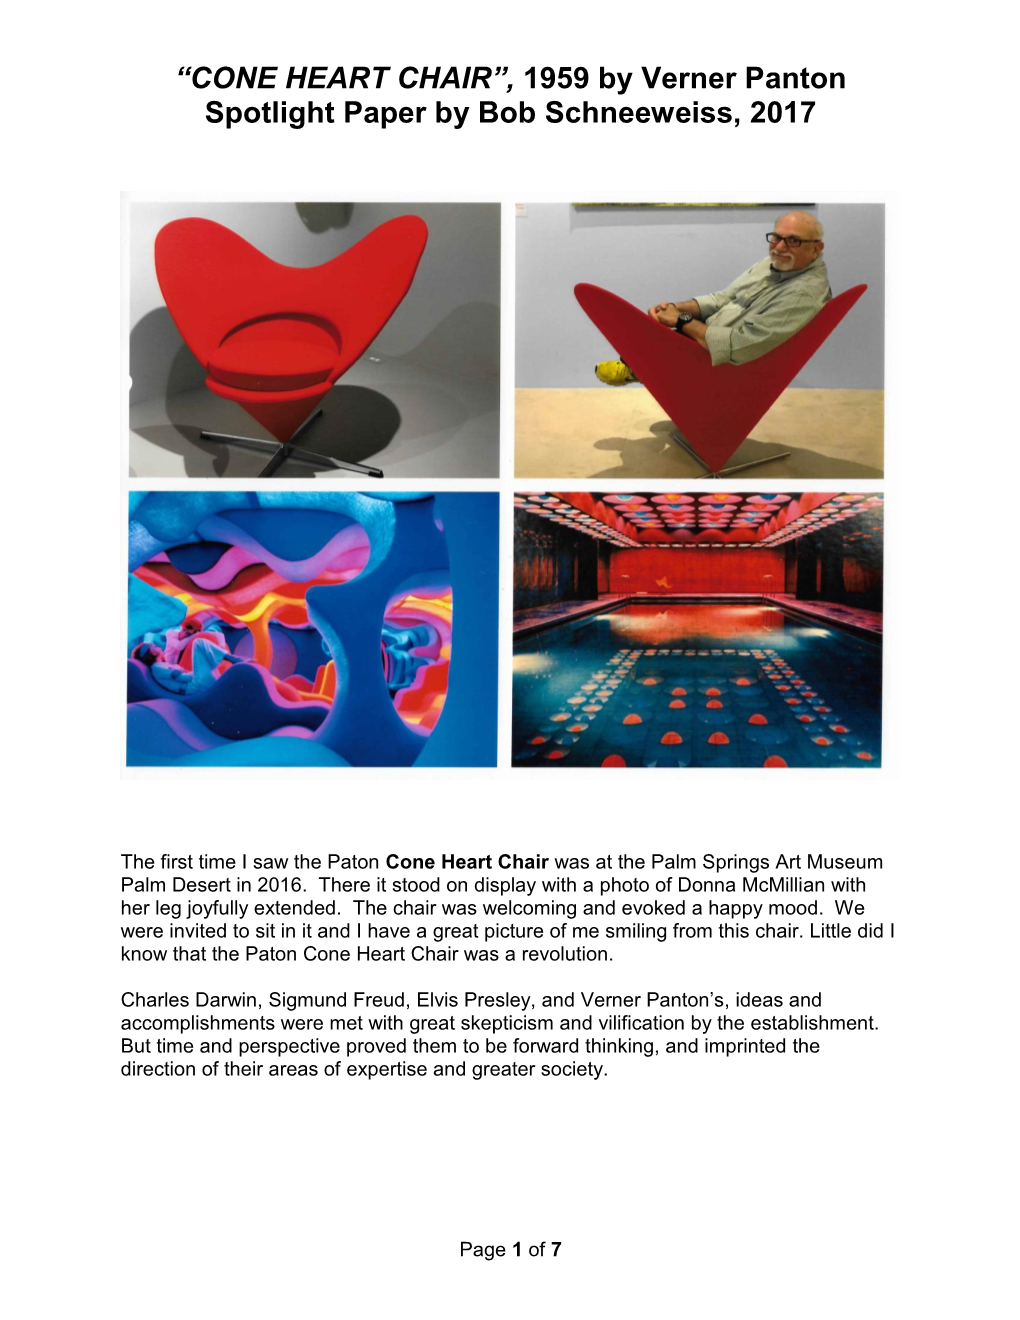 “CONE HEART CHAIR”, 1959 by Verner Panton Spotlight Paper by Bob Schneeweiss, 2017